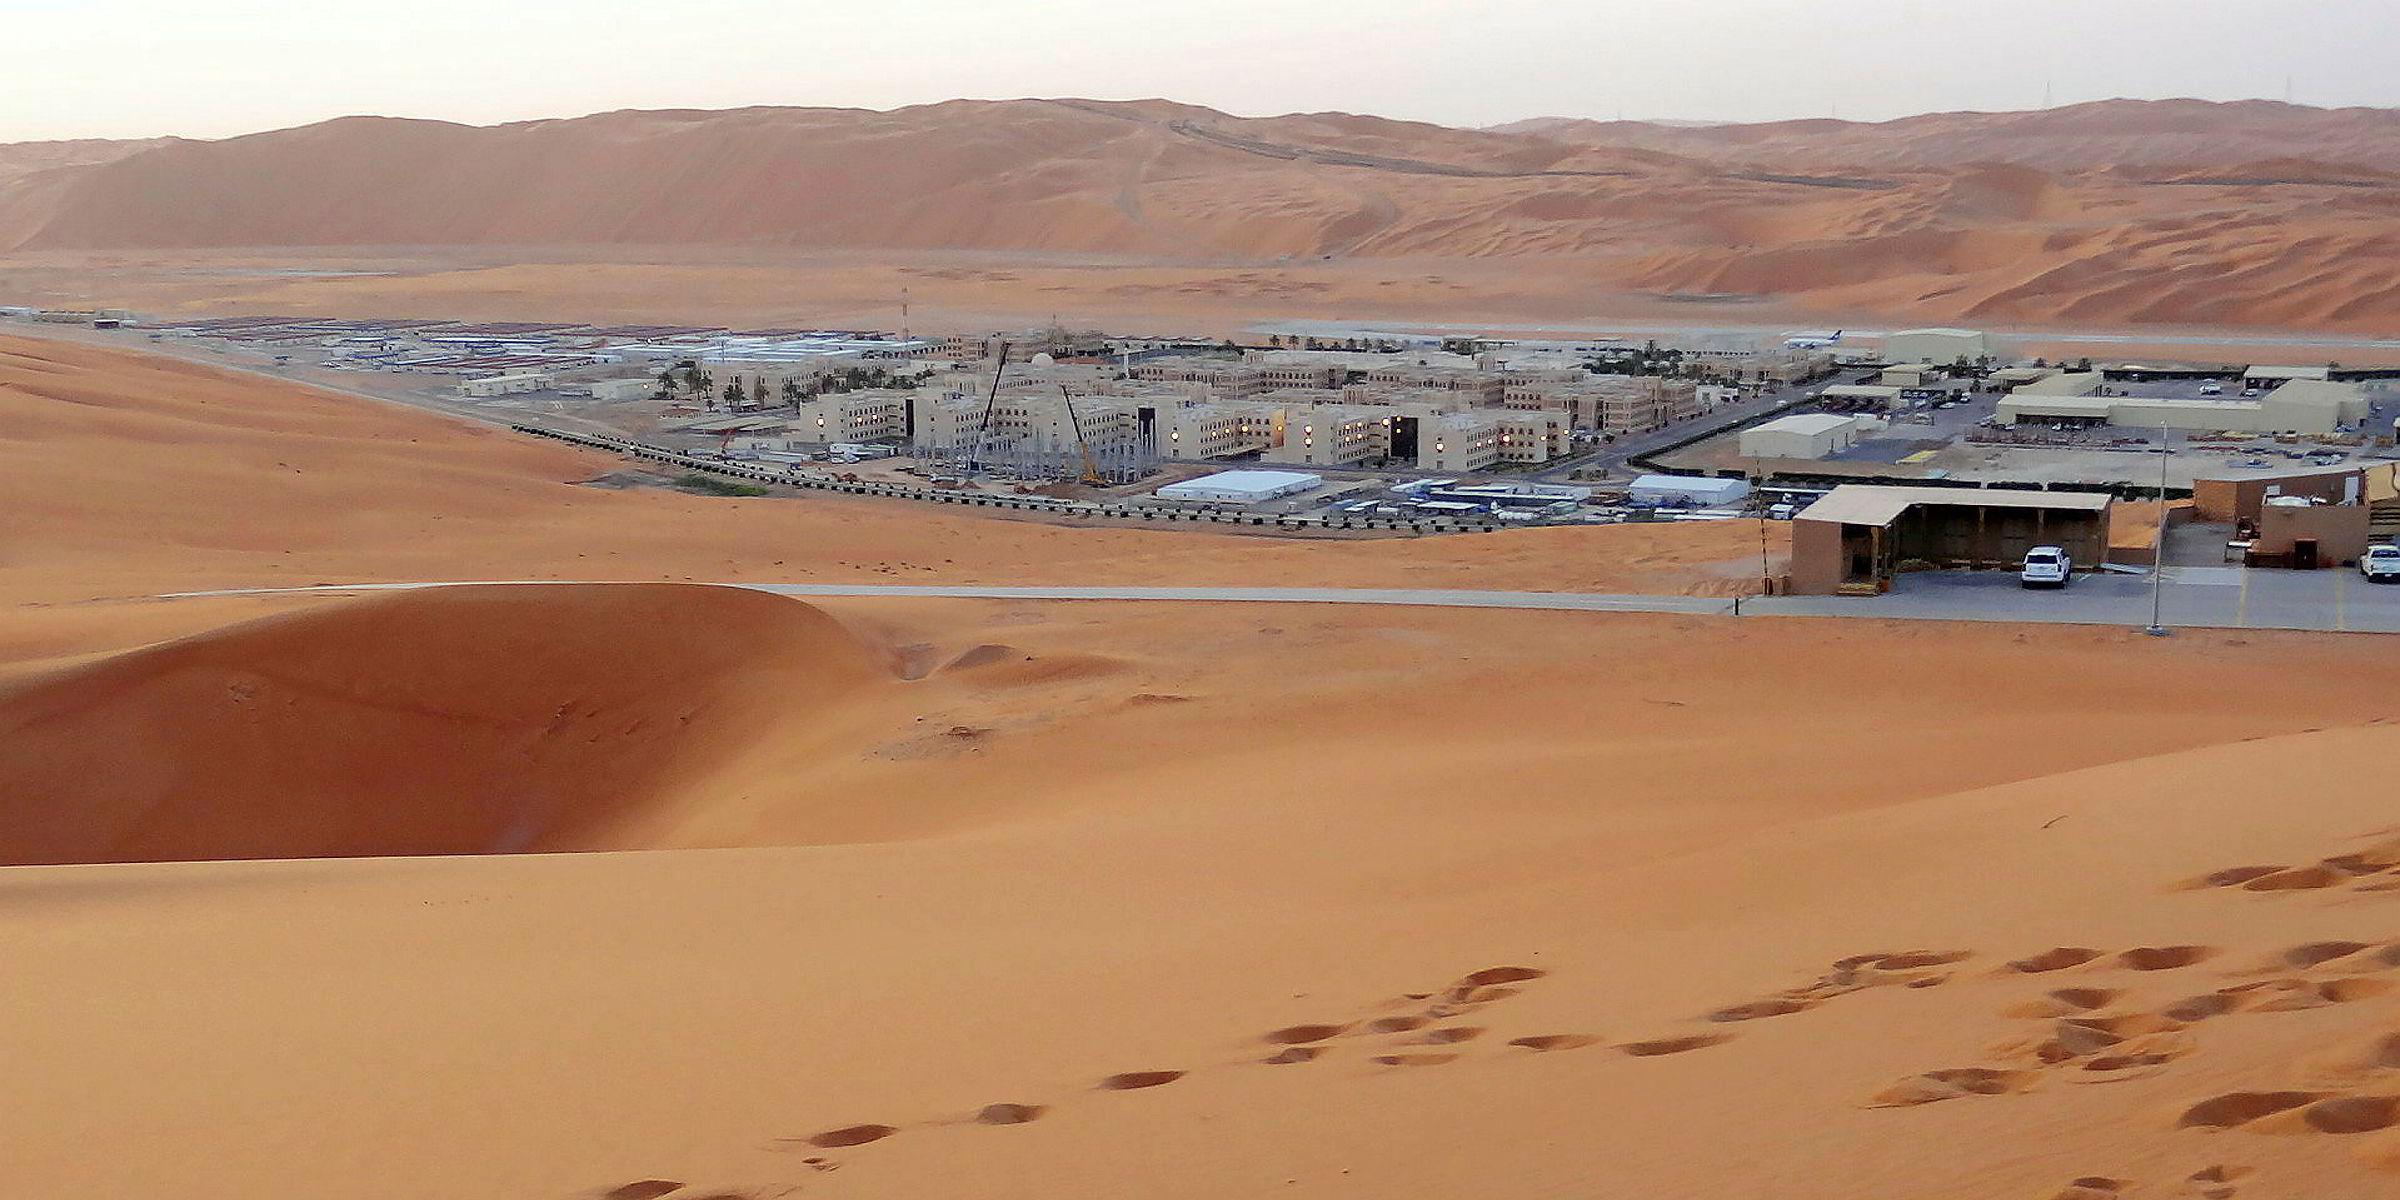 Sands of Fortune: Hollywood film will explore Saudi Arabia’s oil industry